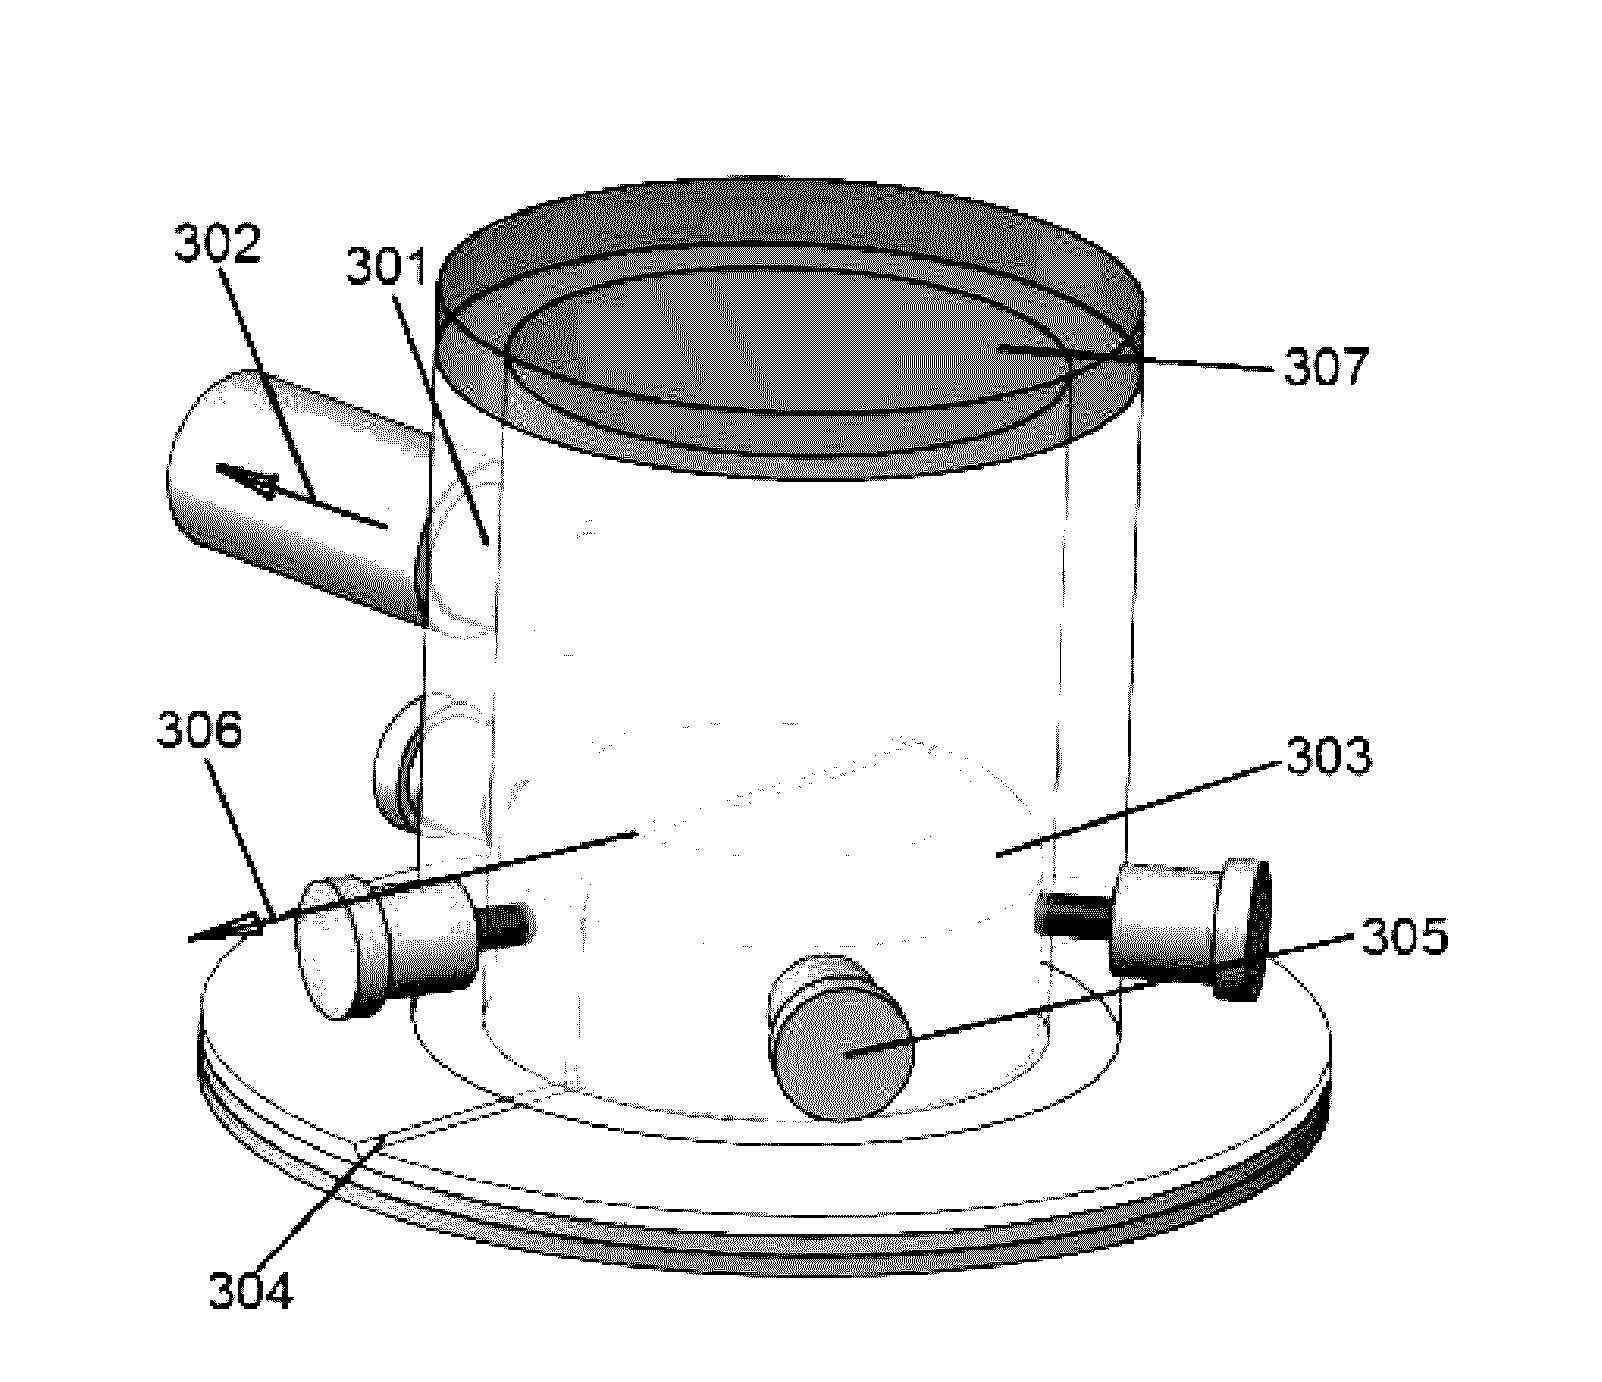 Method or apparatus for wrinkle treatment